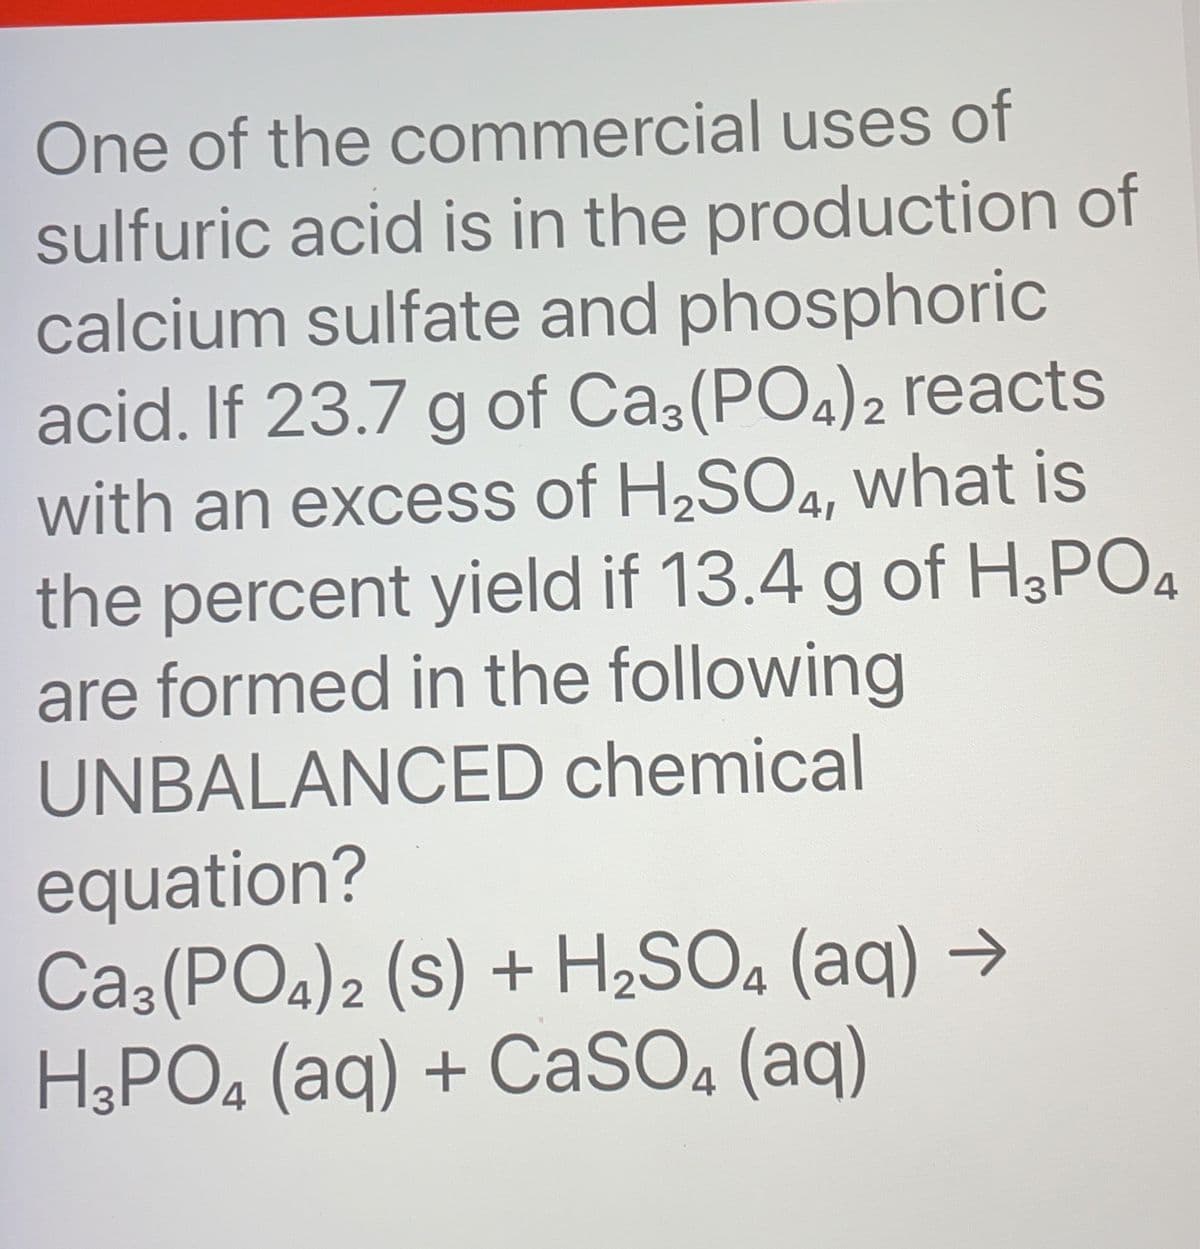 One of the commercial uses of
sulfuric acid is in the production of
calcium sulfate and phosphoric
acid. If 23.7 g of Ca3(PO4)2 reacts
with an excess of H₂SO4, what is
the percent yield if 13.4 g of H3PO4
are formed in the following
UNBALANCED chemical
equation?
CA3(PO4)2 (S) + H₂SO4 (aq) →
H3PO4 (aq) + CaSO4 (aq)